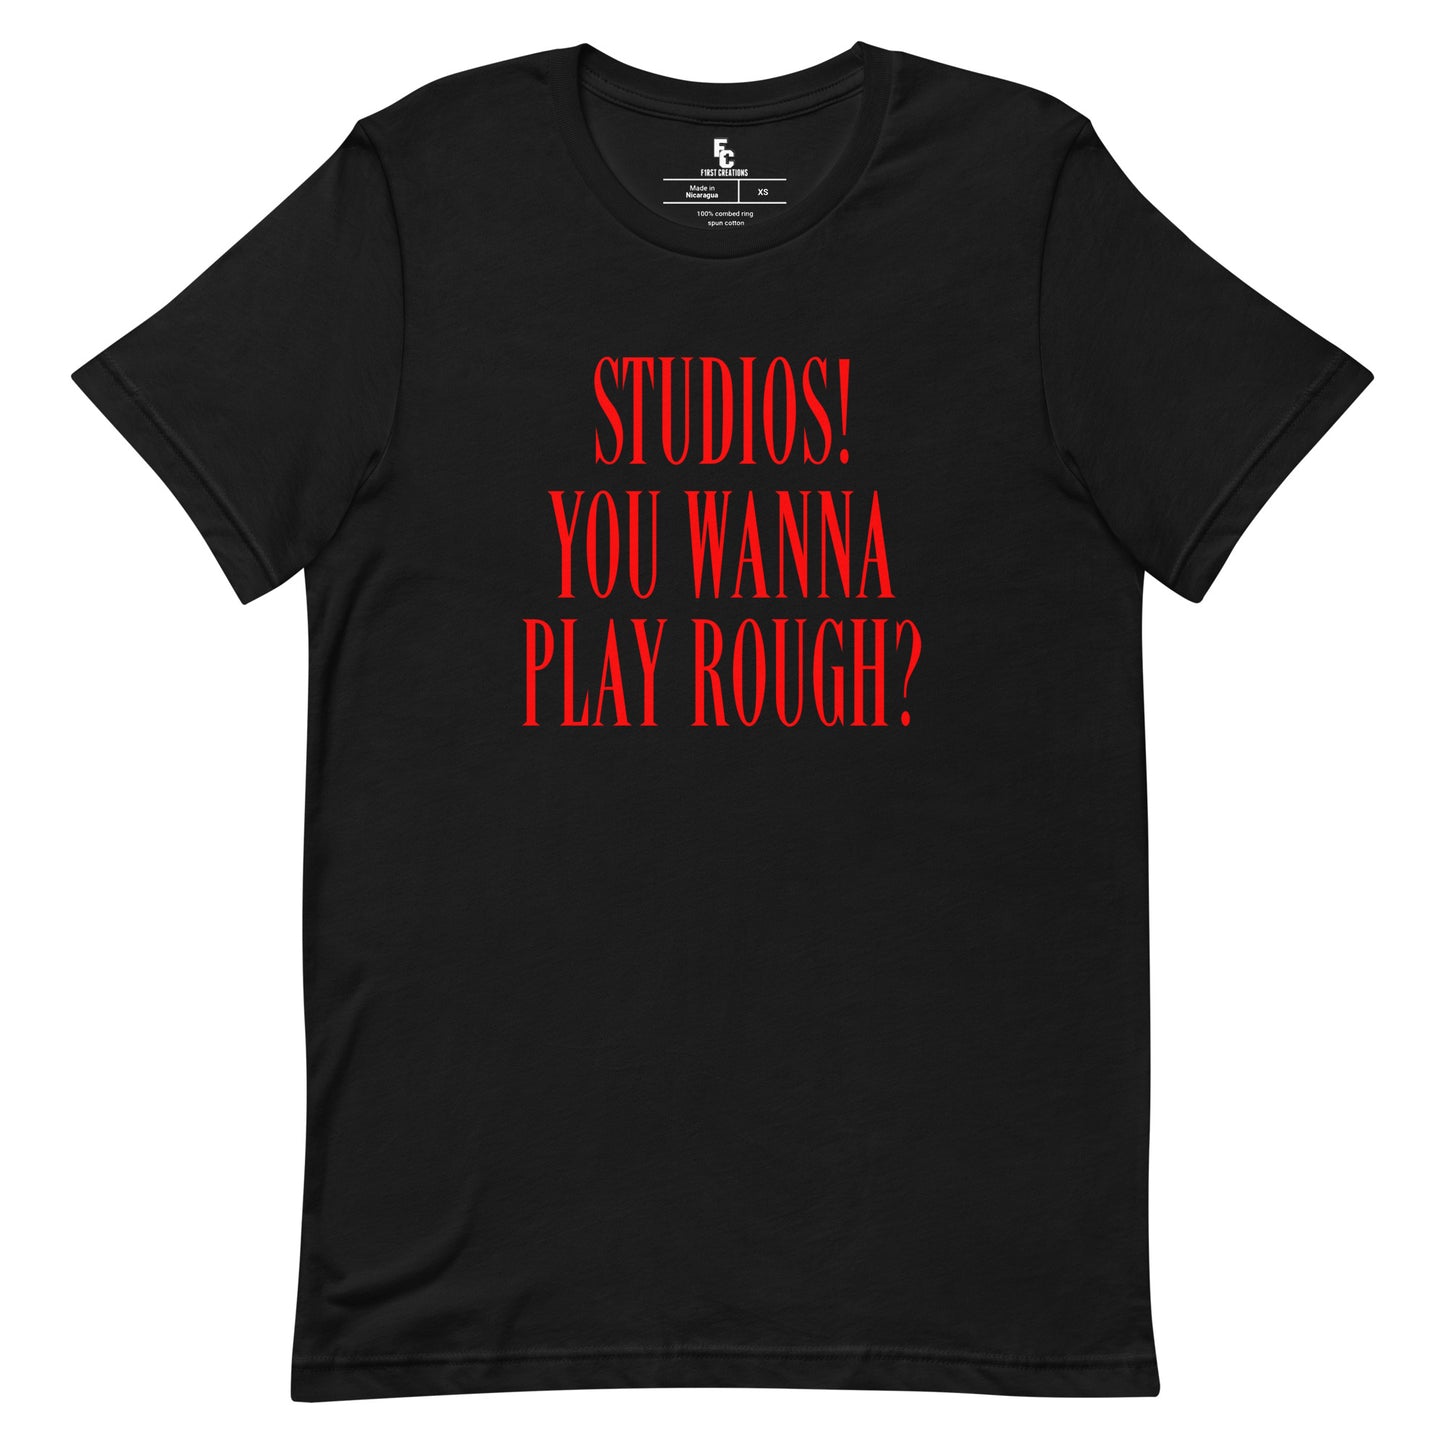 You wanna play rough?